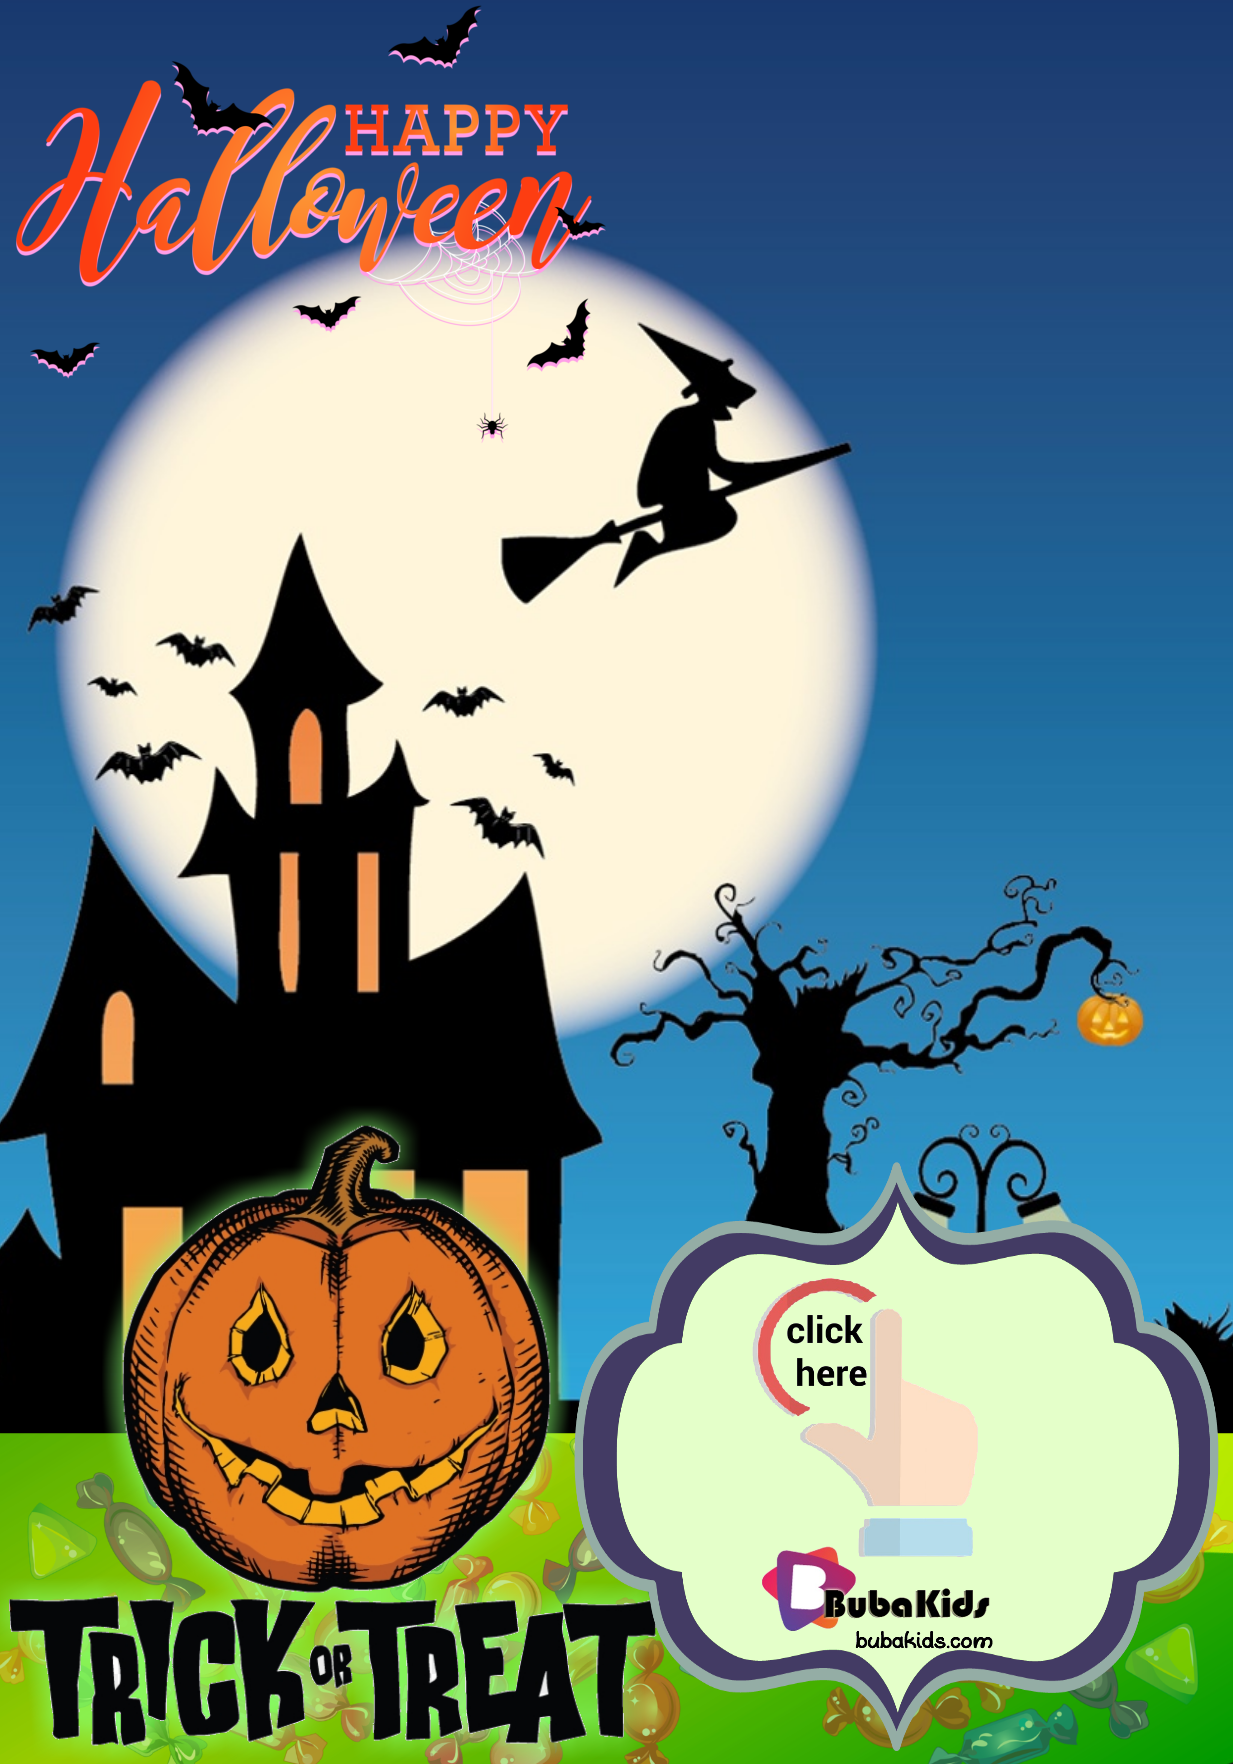 Haloween party invitation template free printable on bubakids.com Wallpaper